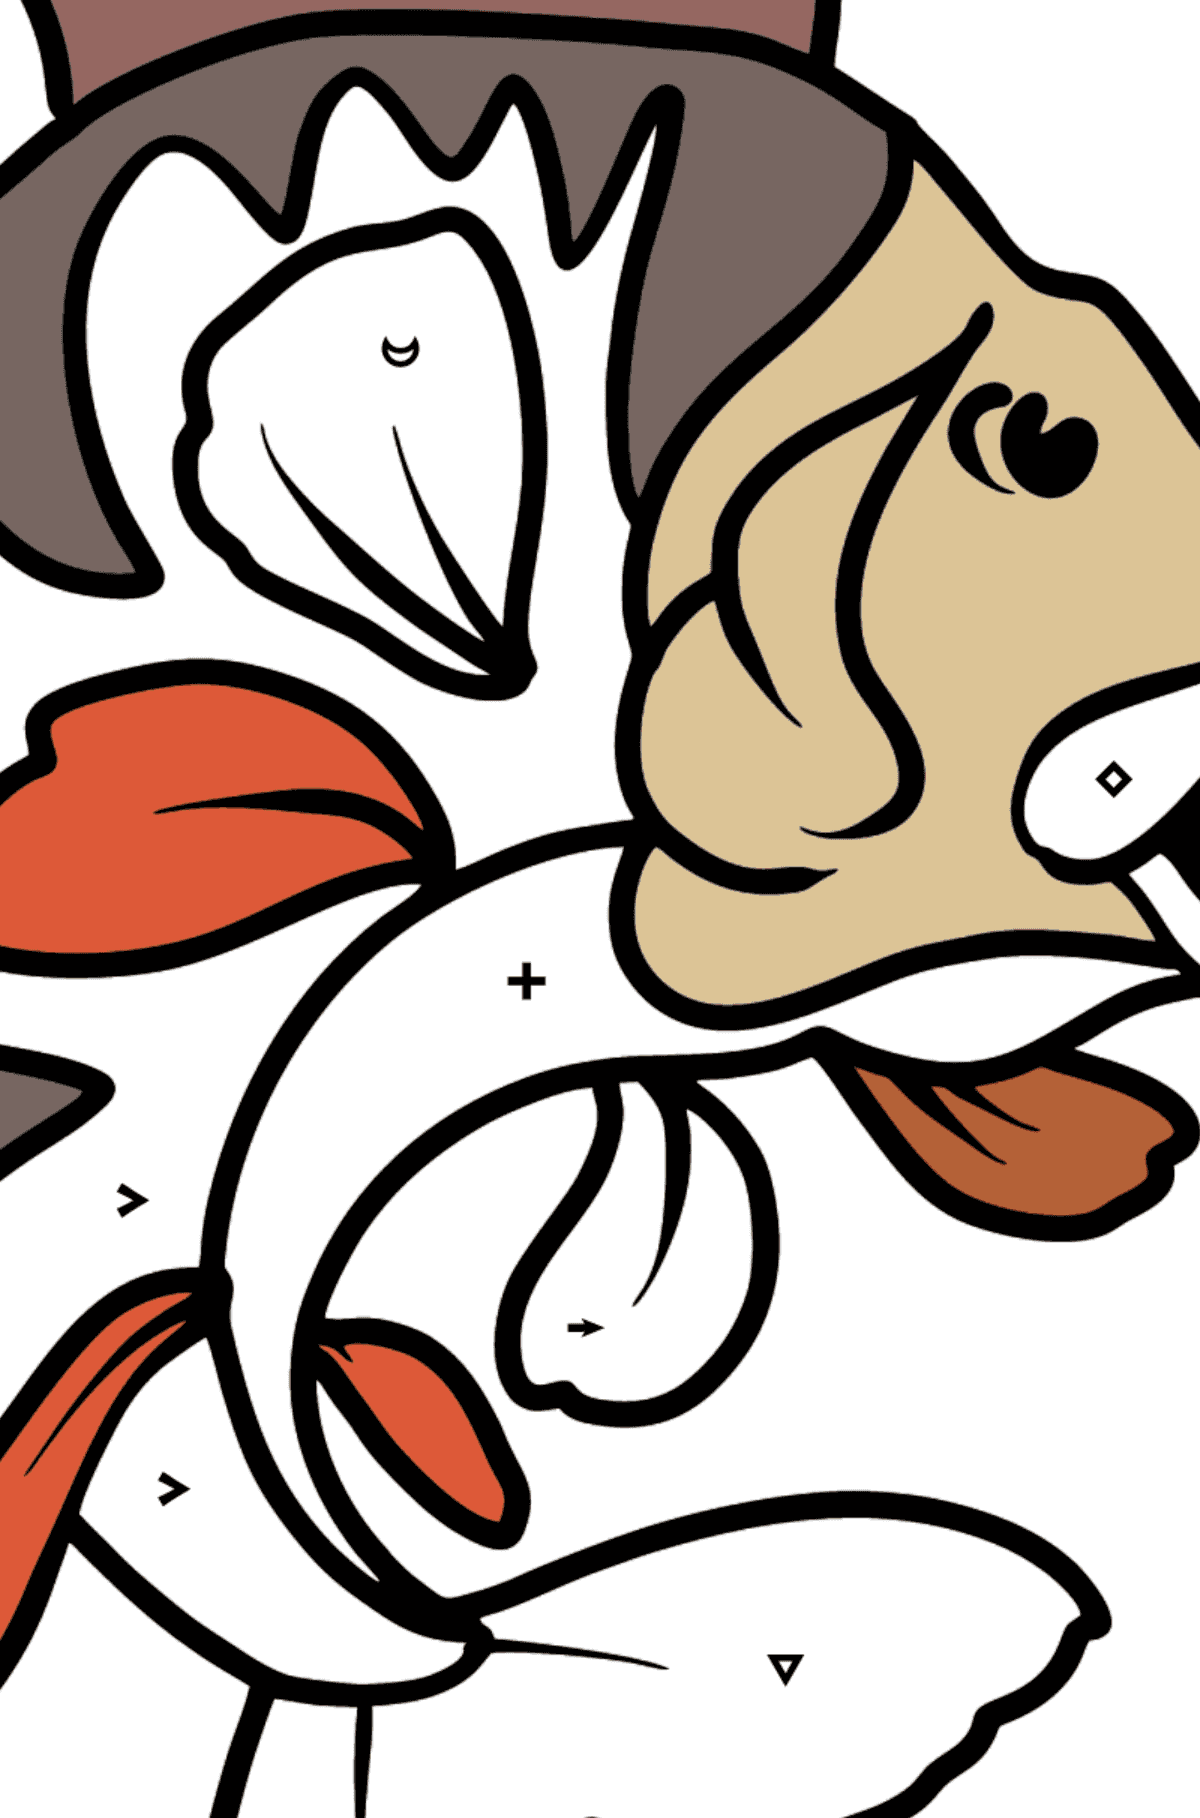 Perch coloring page - Coloring by Symbols for Kids